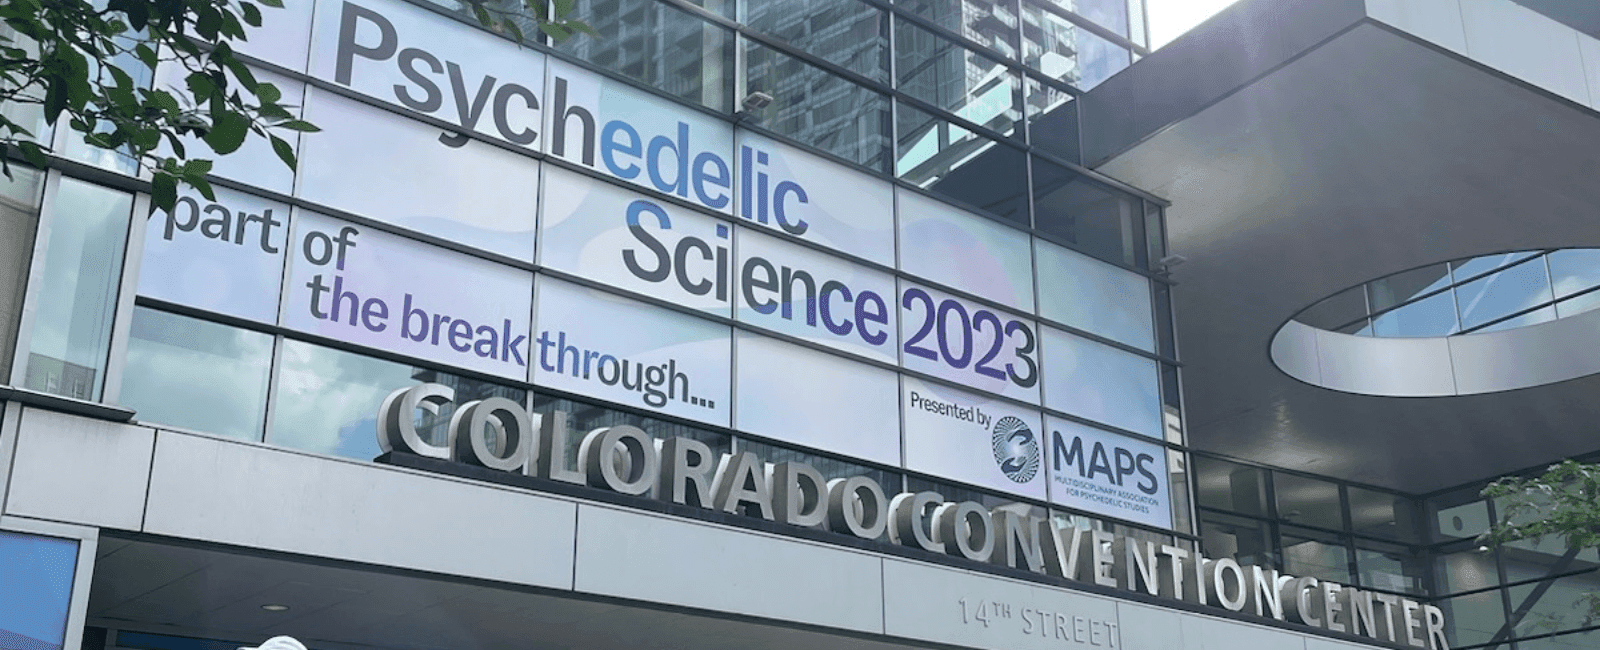 A Recap of MAPS' Psychedelic Science 2023